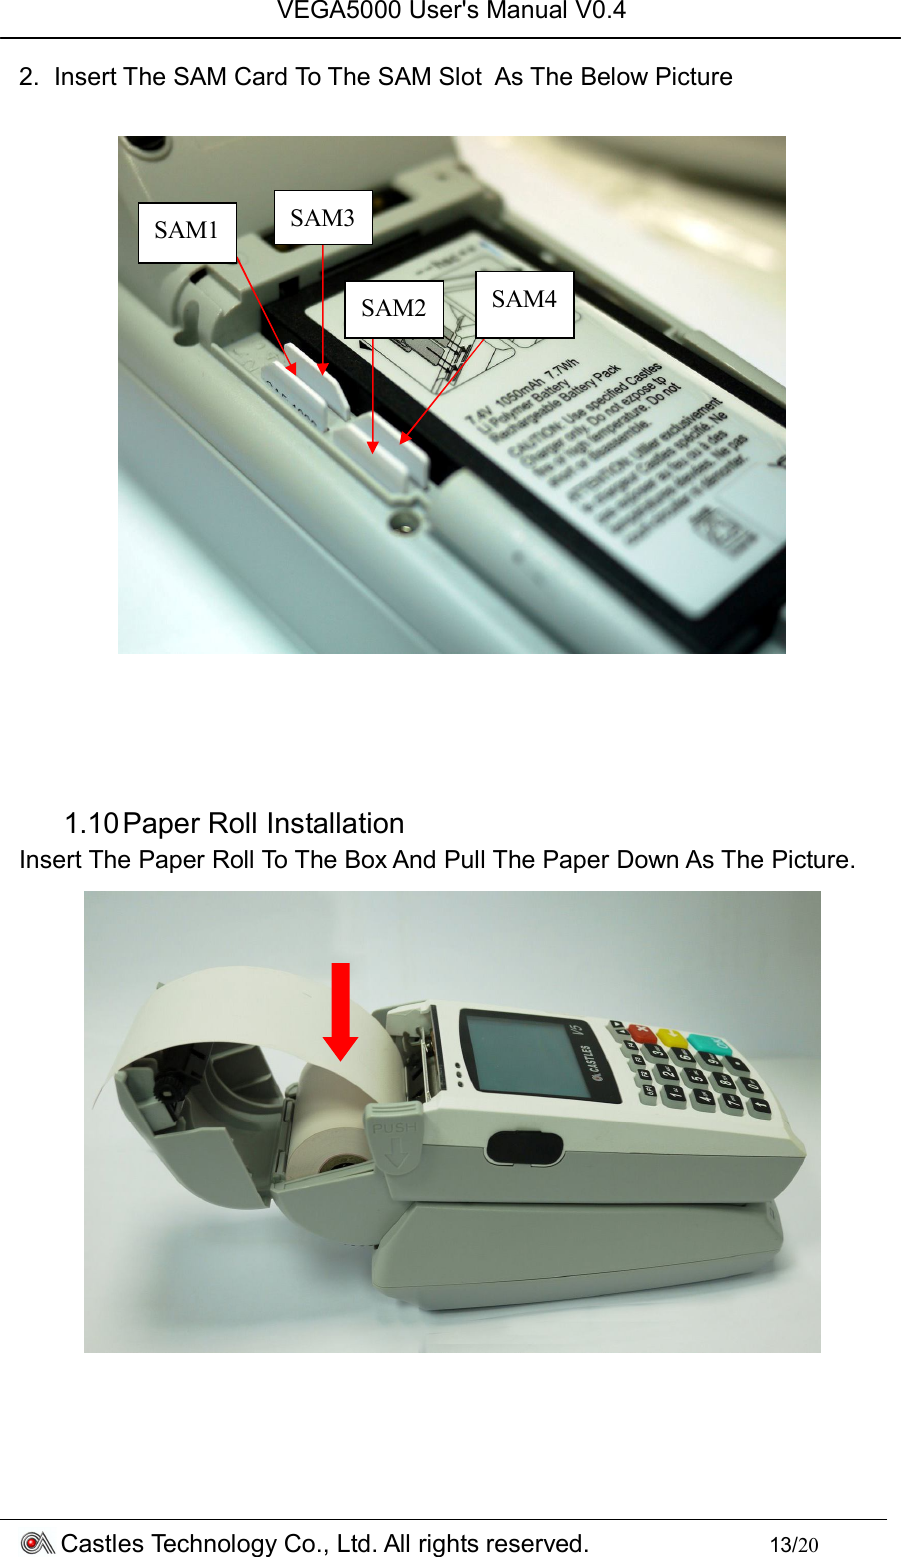 VEGA5000 User&apos;s Manual V0.4 Castles Technology Co., Ltd. All rights reserved.        13/20 2.  Insert The SAM Card To The SAM Slot  As The Below Picture       1.10 Paper Roll Installation Insert The Paper Roll To The Box And Pull The Paper Down As The Picture.     SAM1 SAM4 SAM2 SAM3 